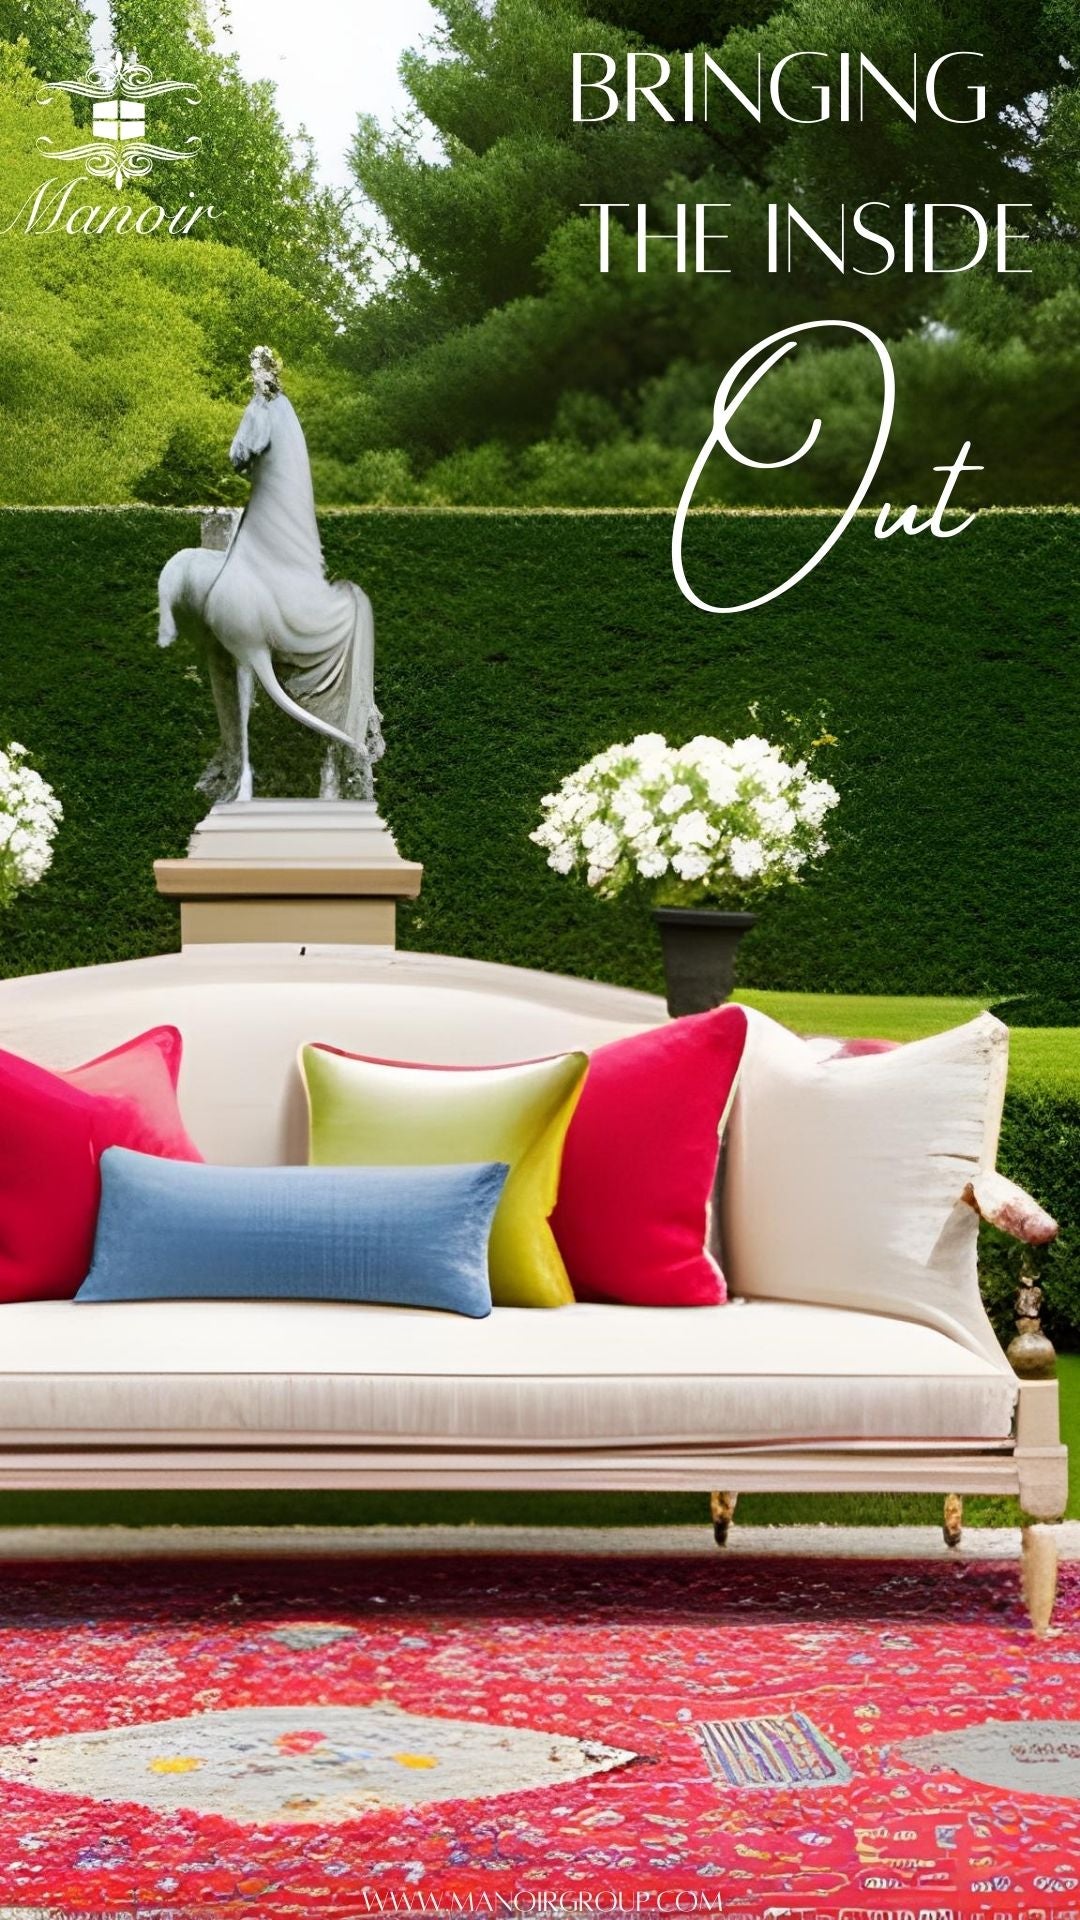 Bring the Inside Outdoors for Summer🌞: Decorating a Chic Outdoor Space